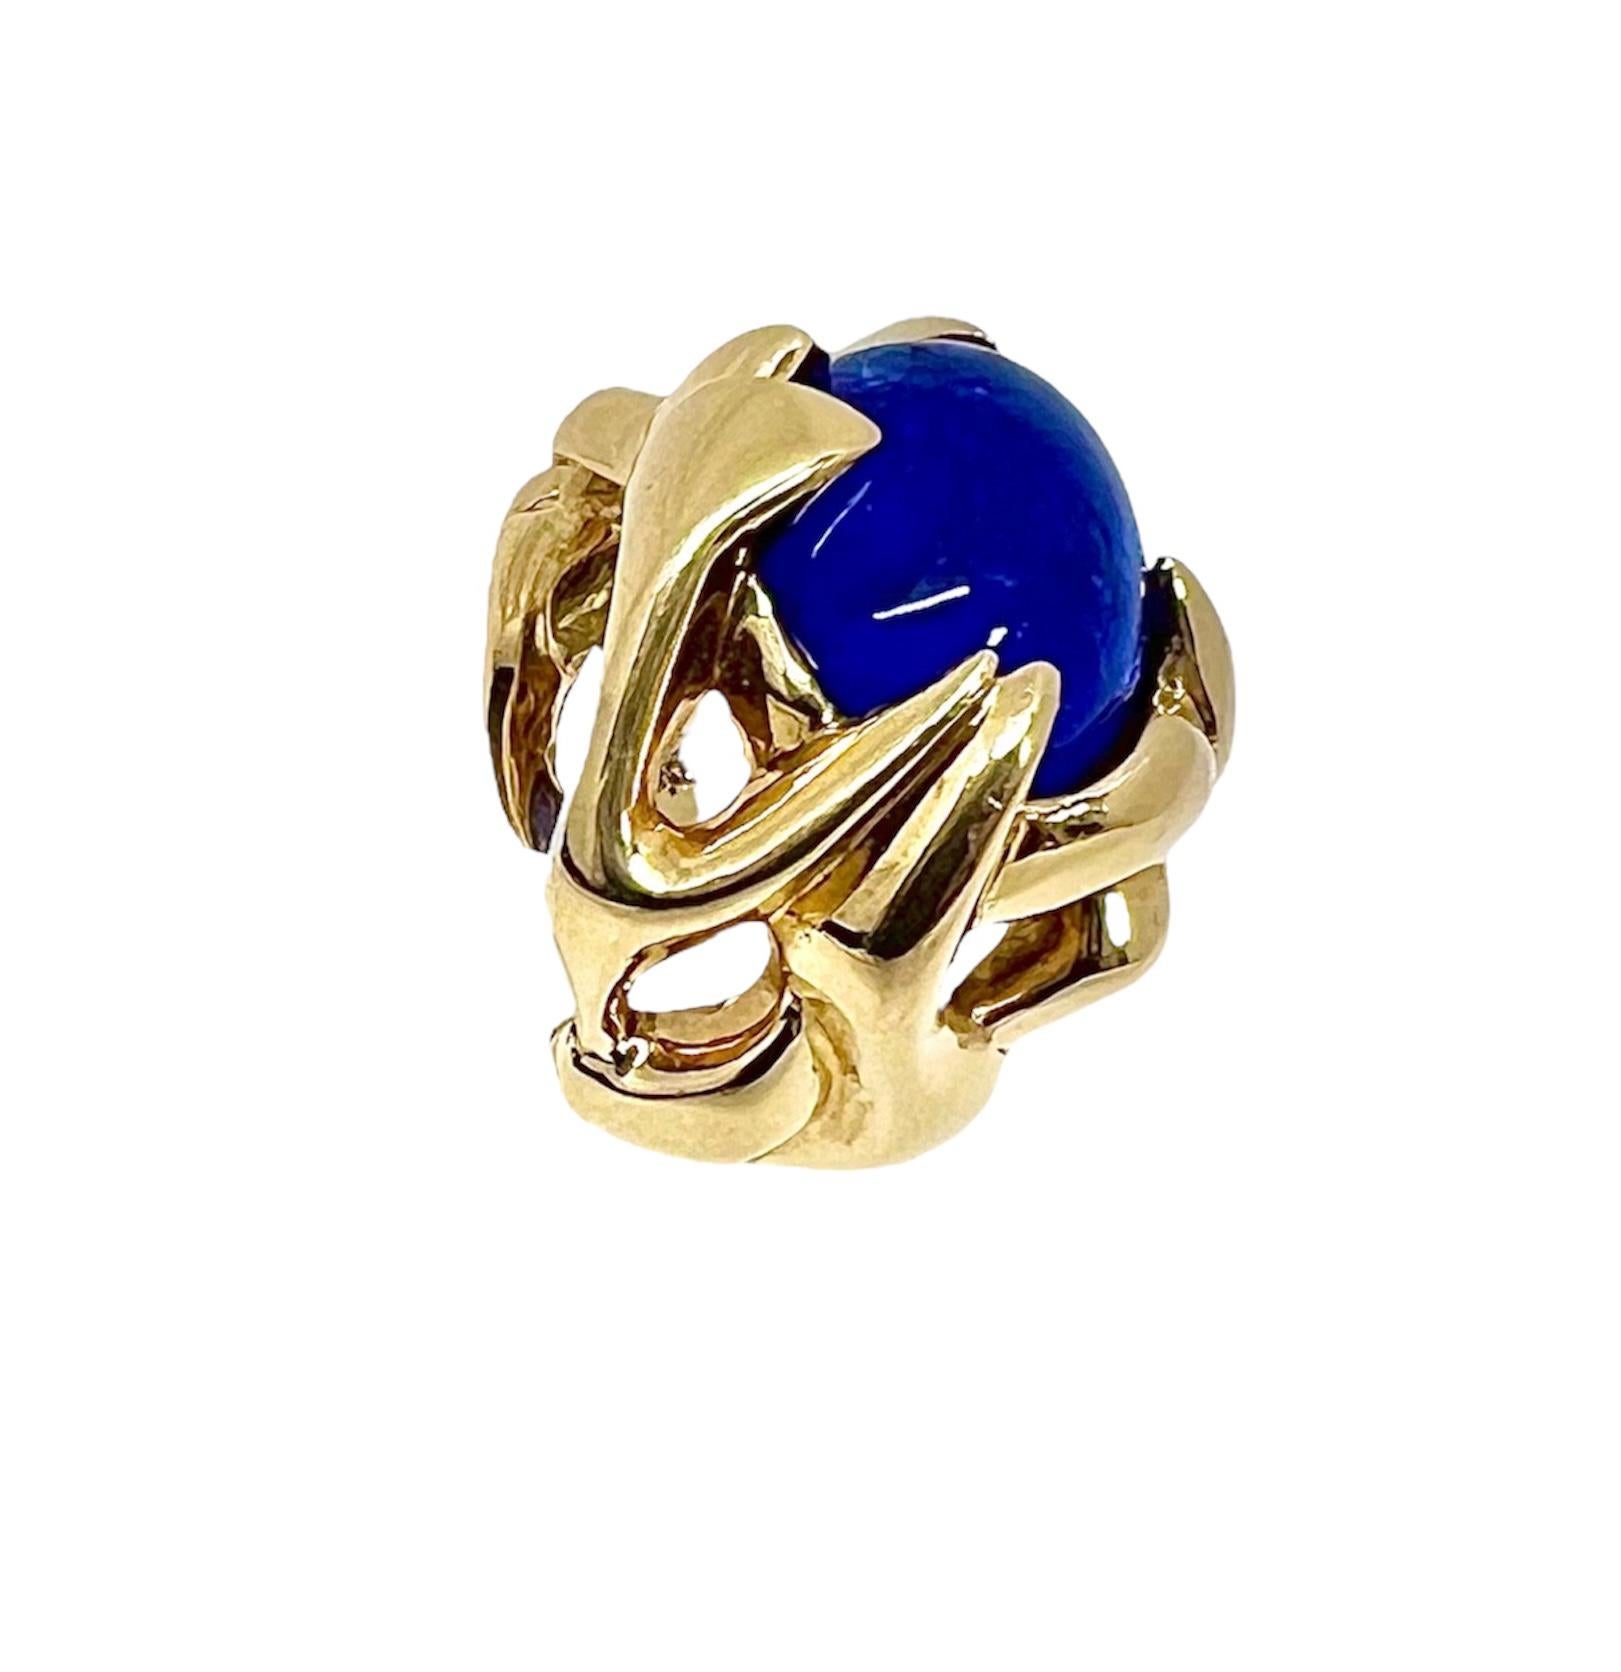 One of a kind Cocktail Ring with 10 Carat Cabochon Tanzanite in 18 Karat Yellow Gold